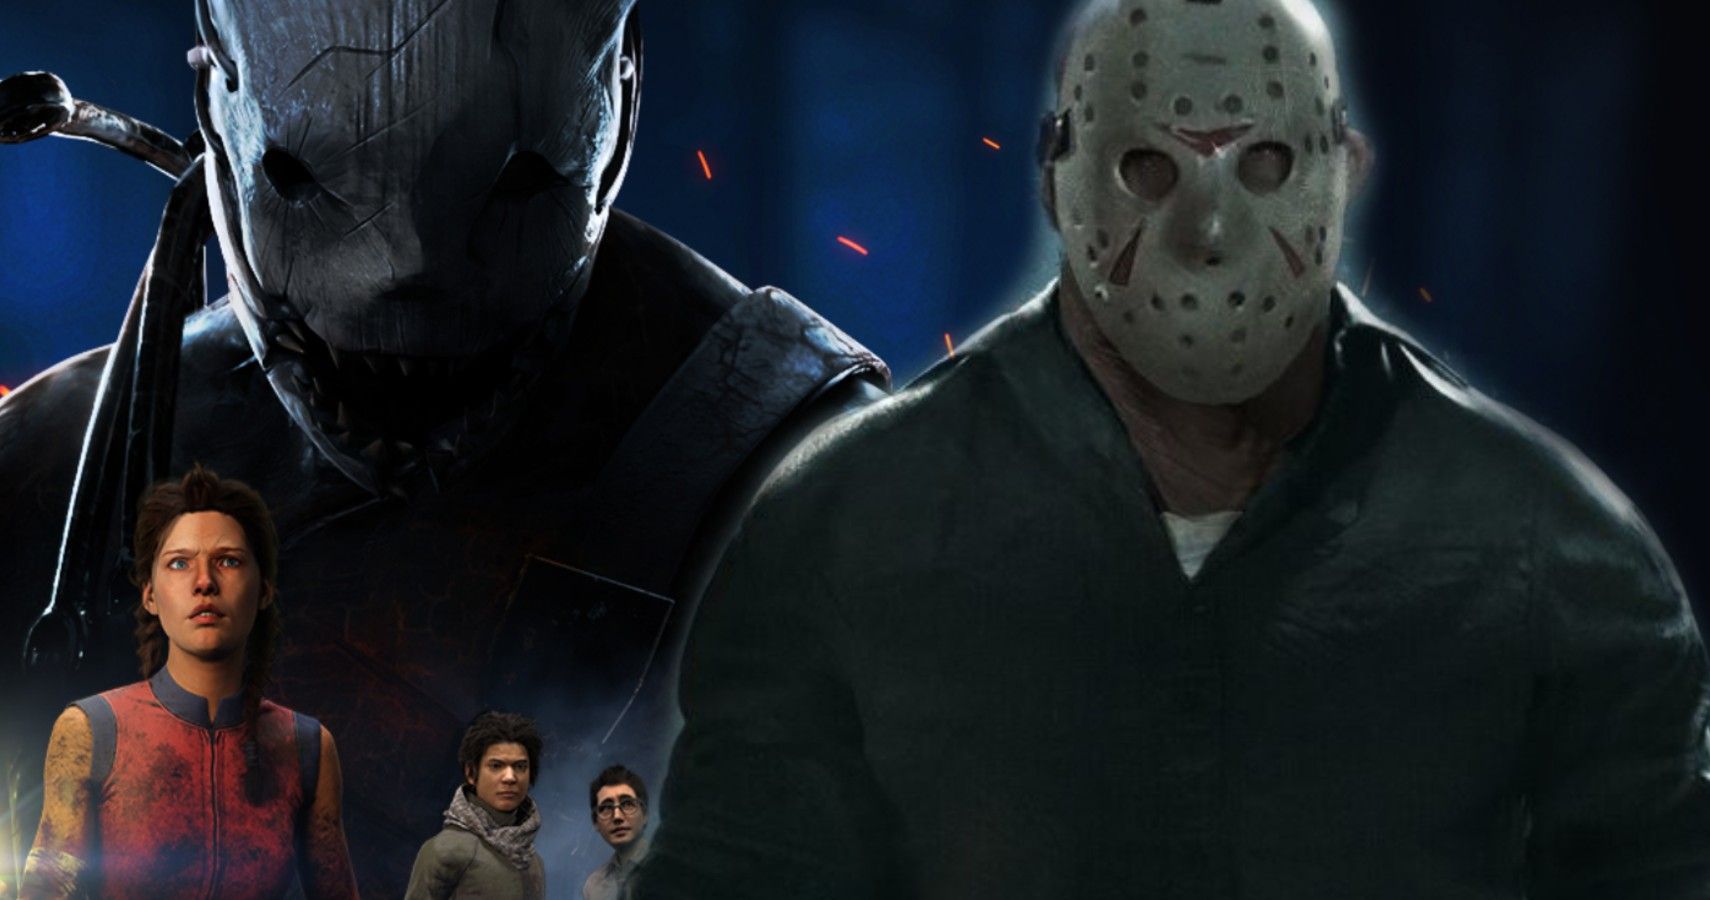 Dead By Daylight Vs Friday The 13th Which Horror Game Is Better